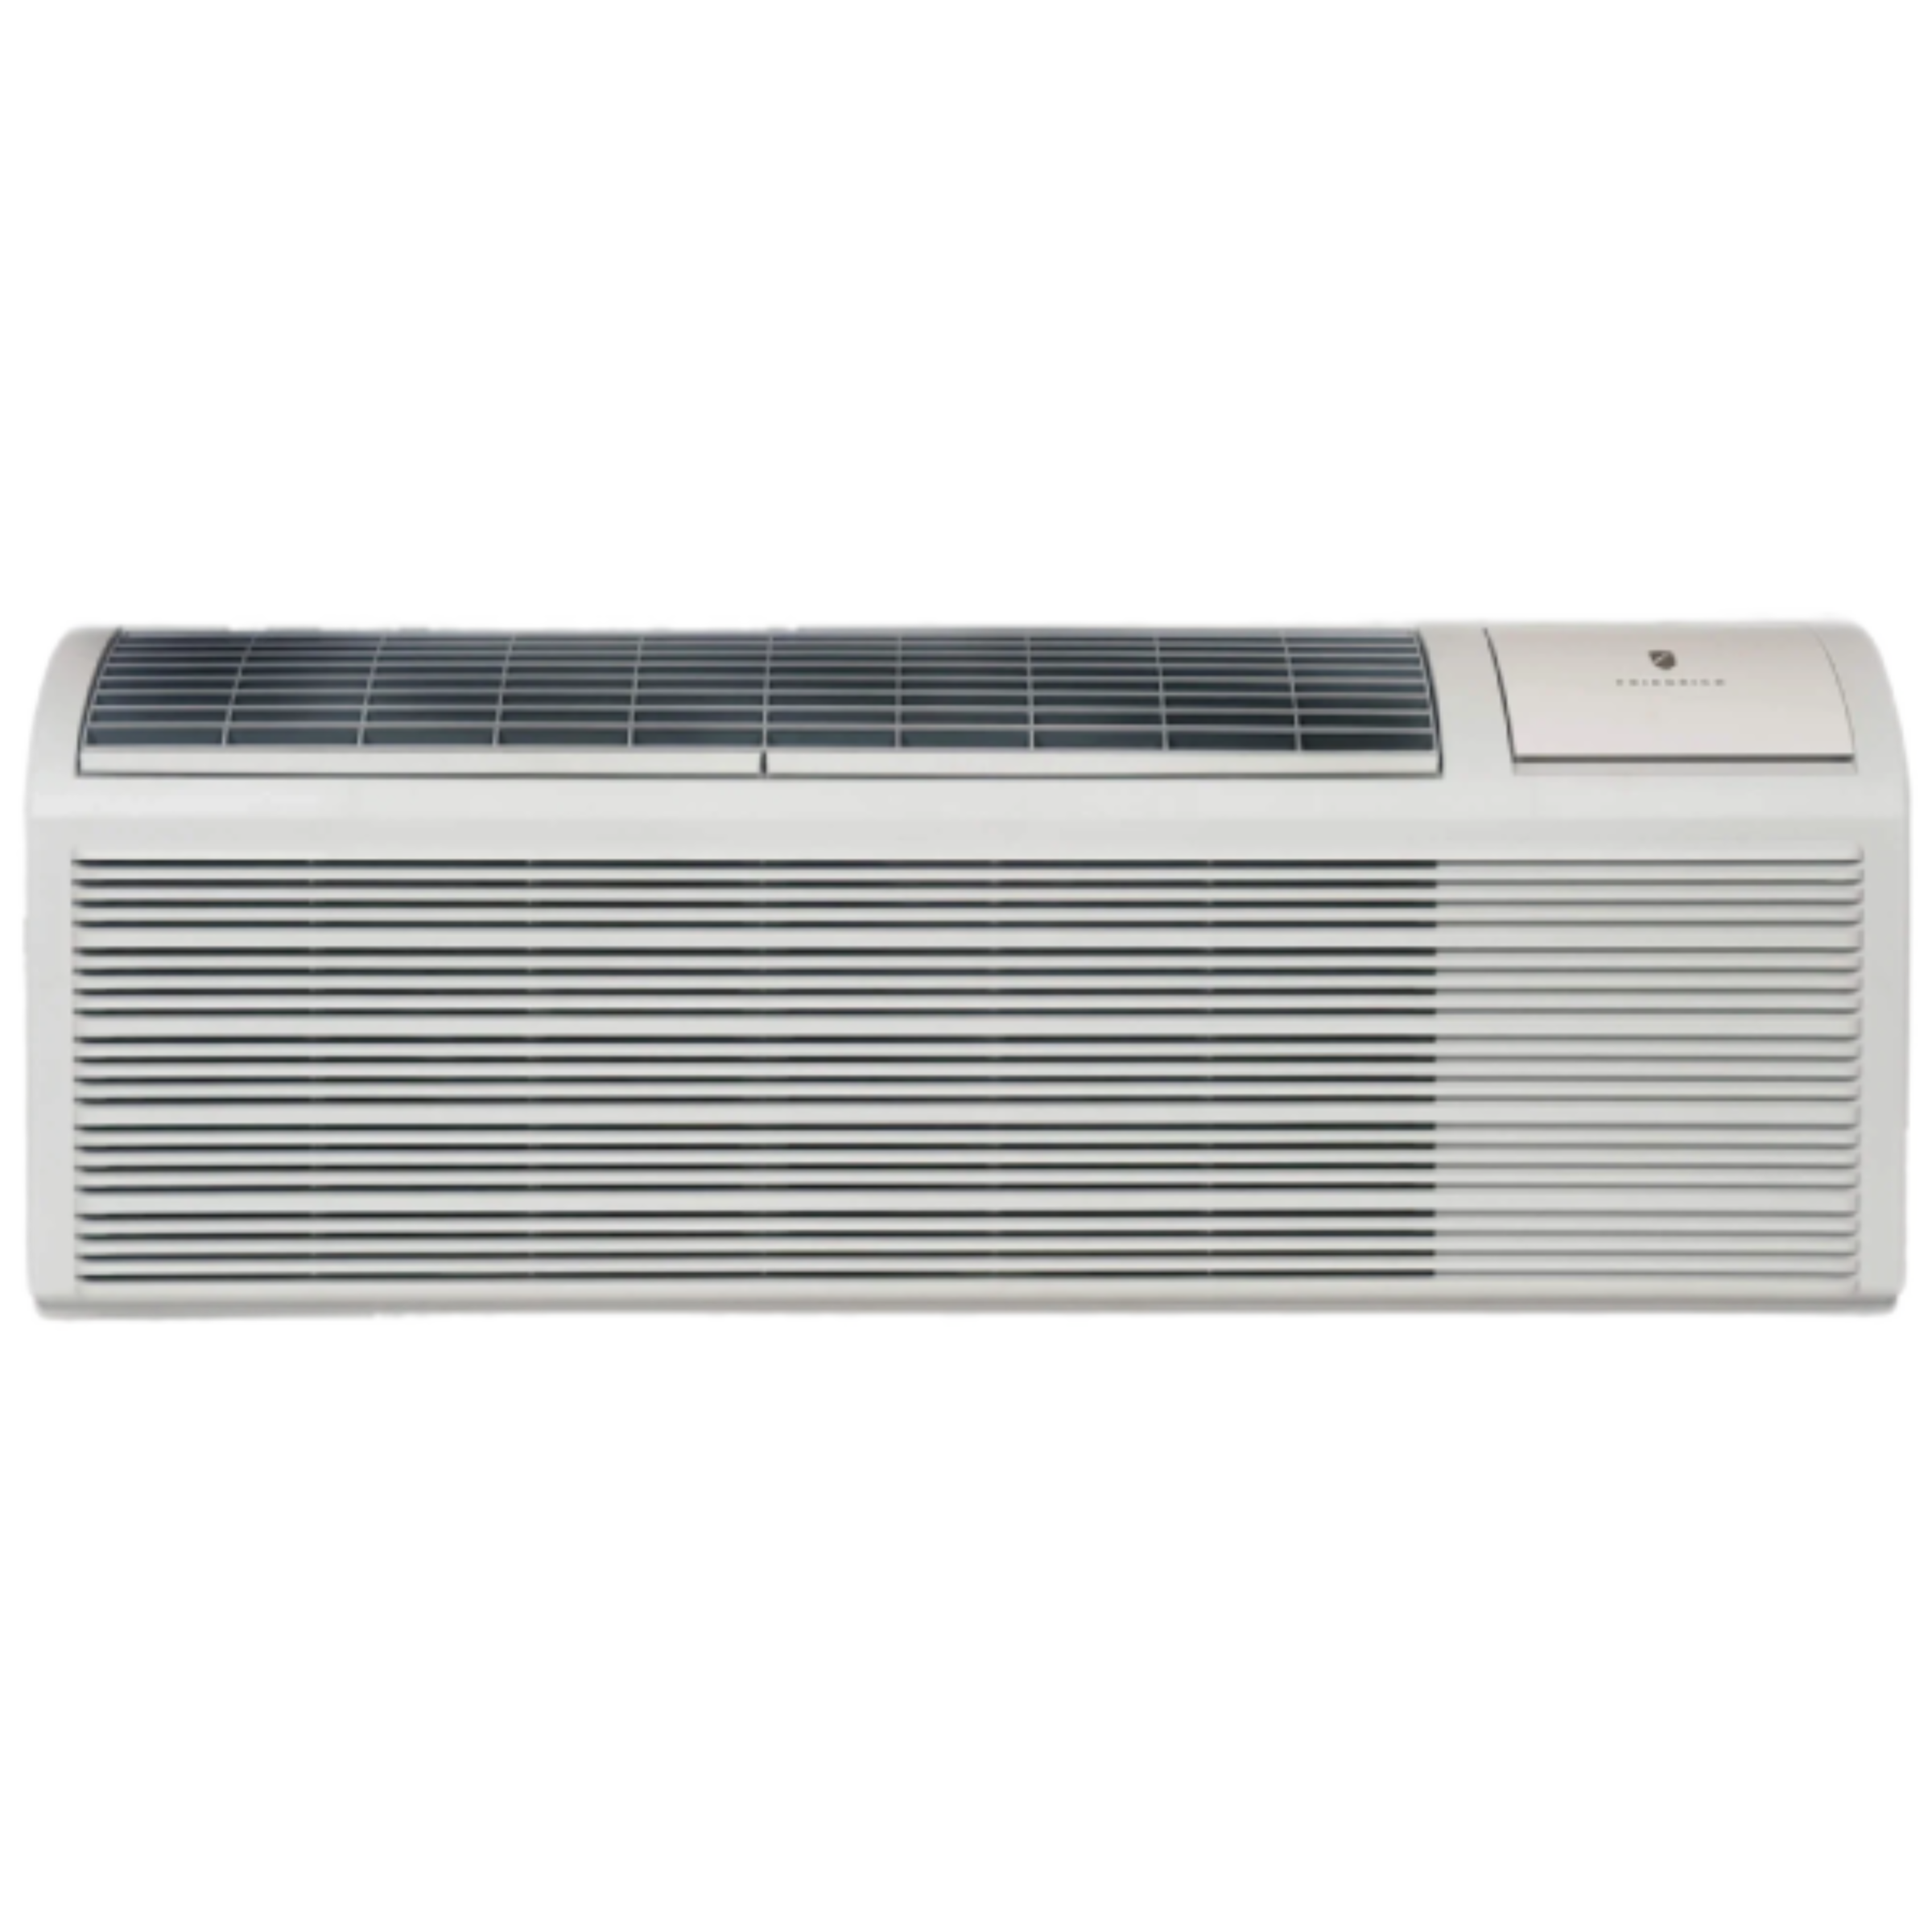 Friedrich ZoneAire Premier Packaged Terminal Air Conditioner with Electric Heat Model PDE12R3SG, 11.6 EER, 265 V, 400 CFM, 11800 BTU